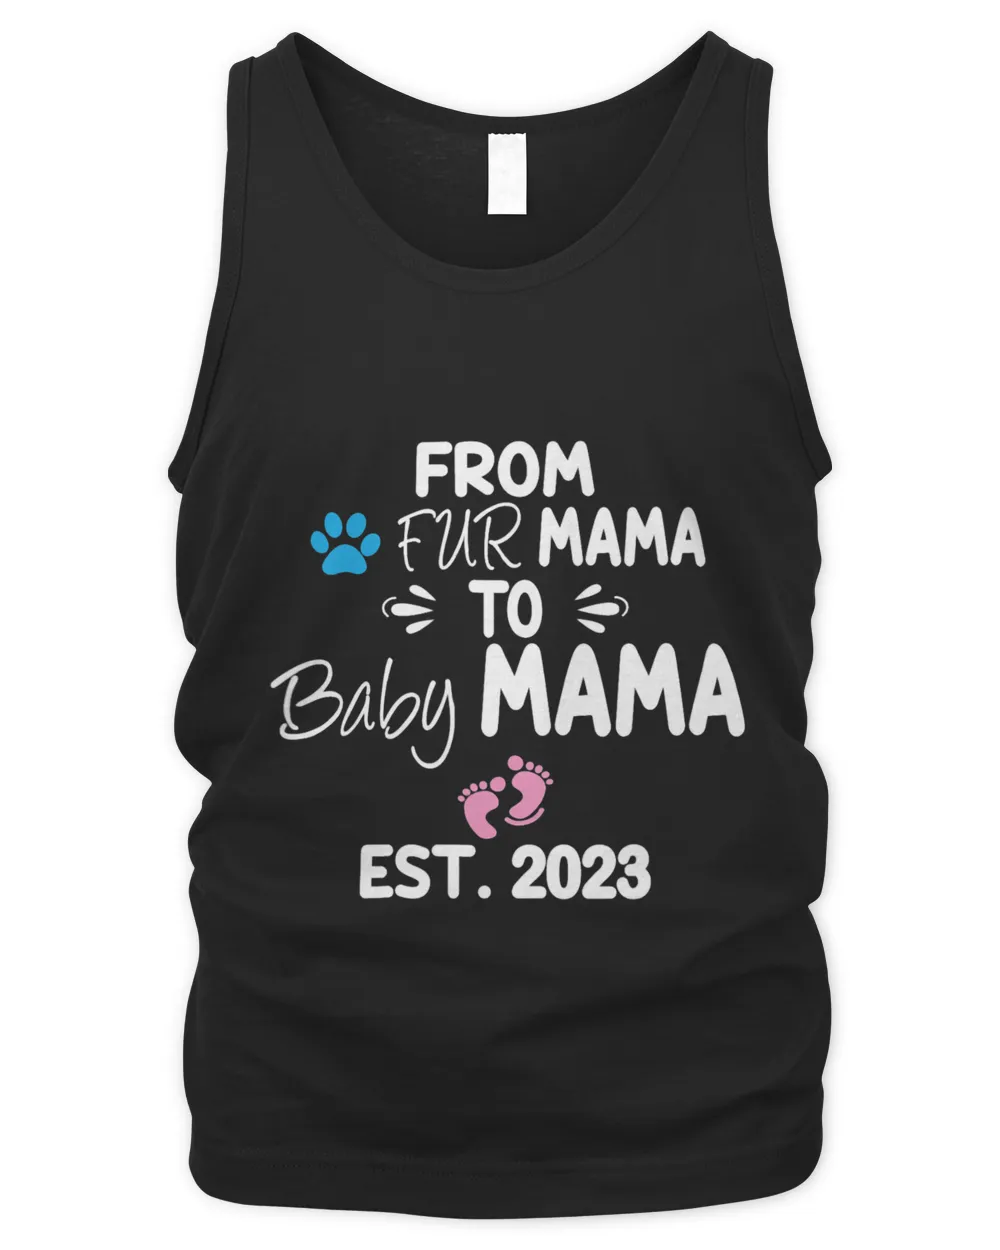 From Fur mama to baby mama est funny new mom dog lover